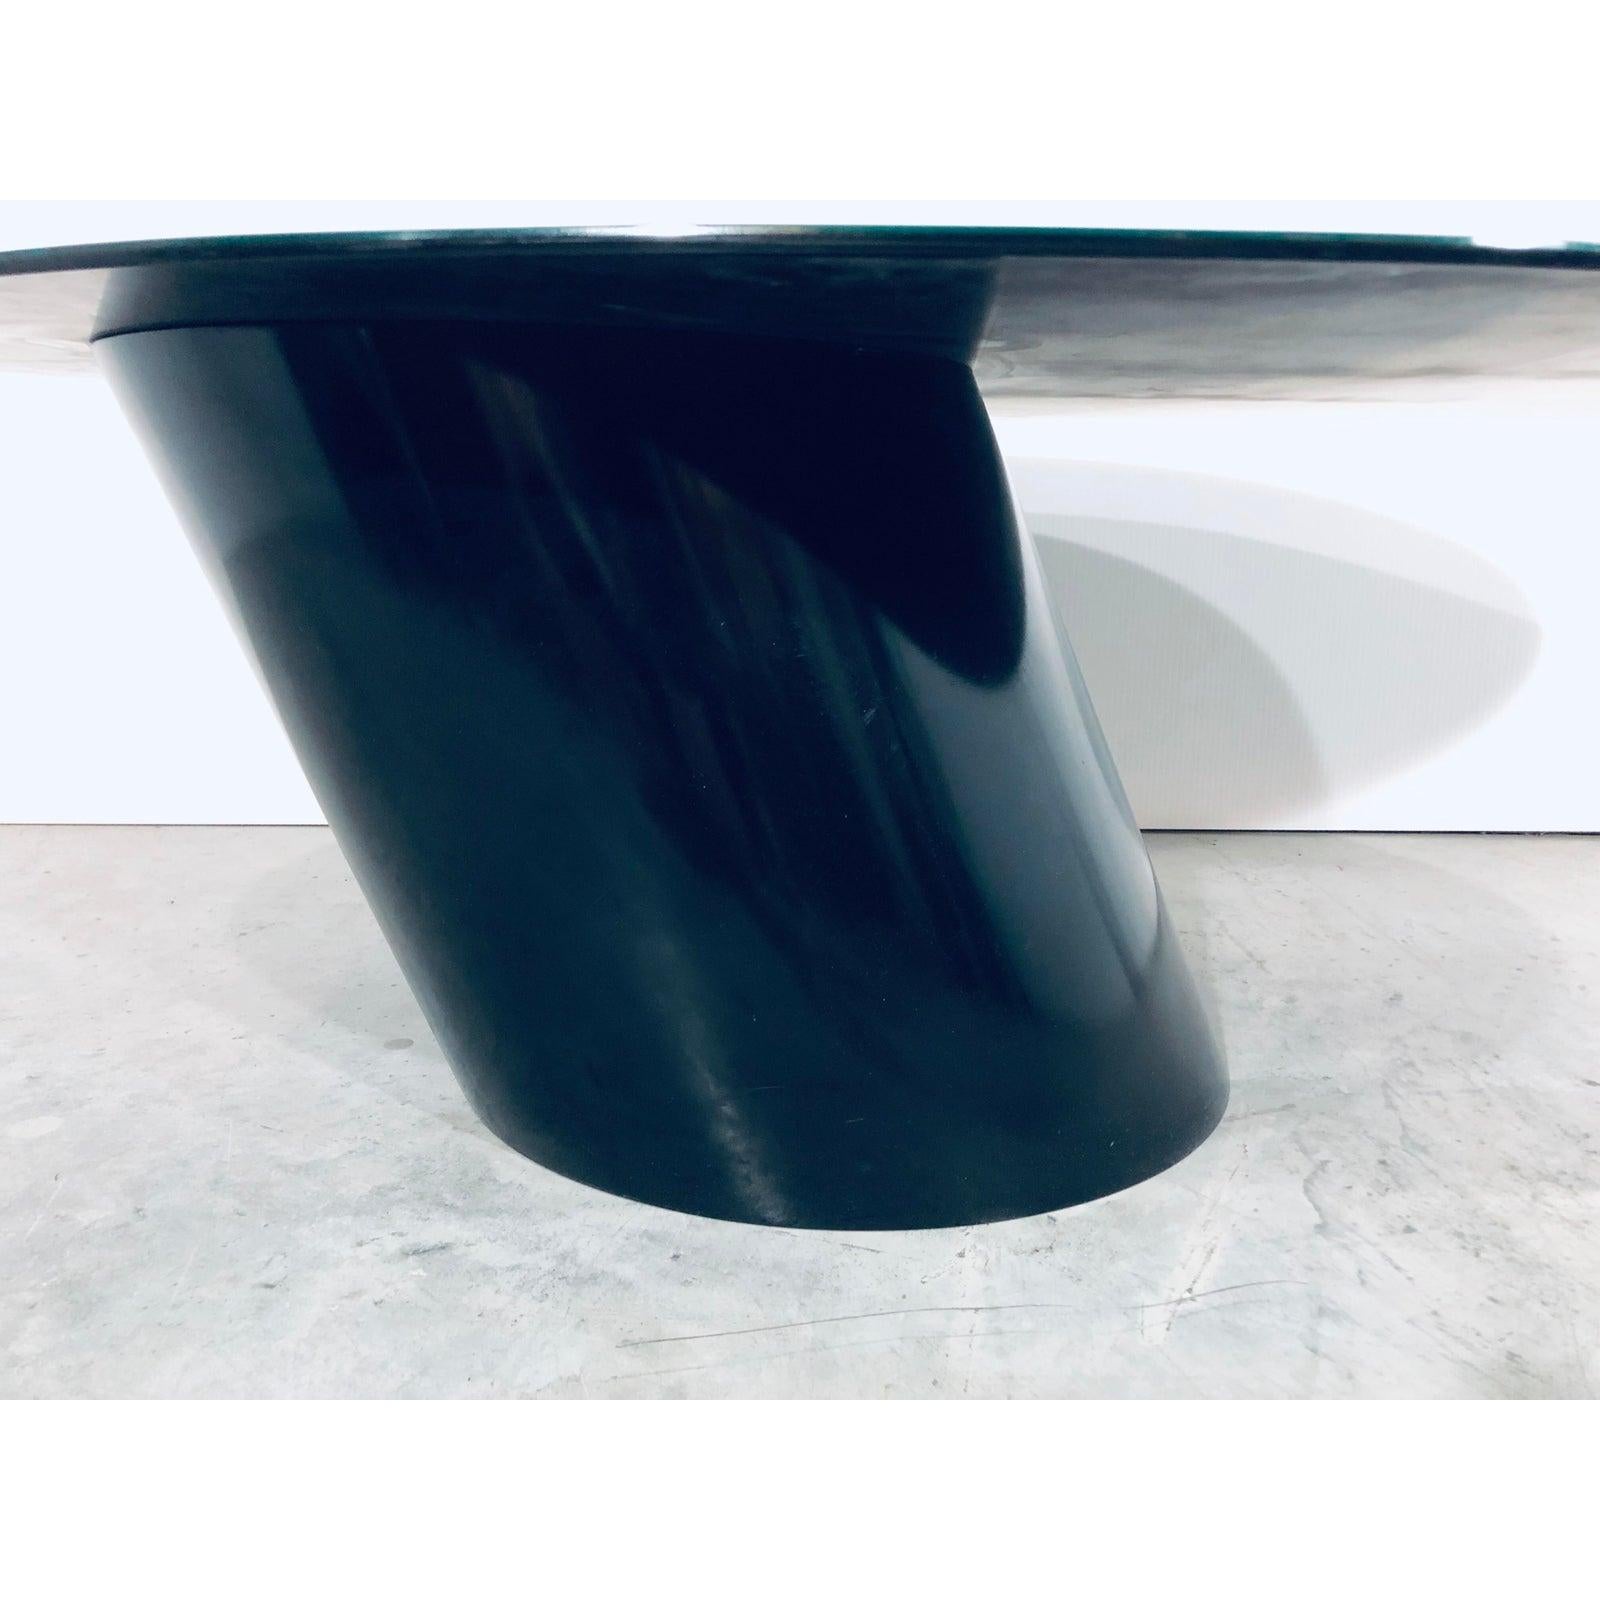 Black beveled glass with black lacquered wood base cantilevered coffee or cocktail table by Design Institute of America. Signed on the inside of base.